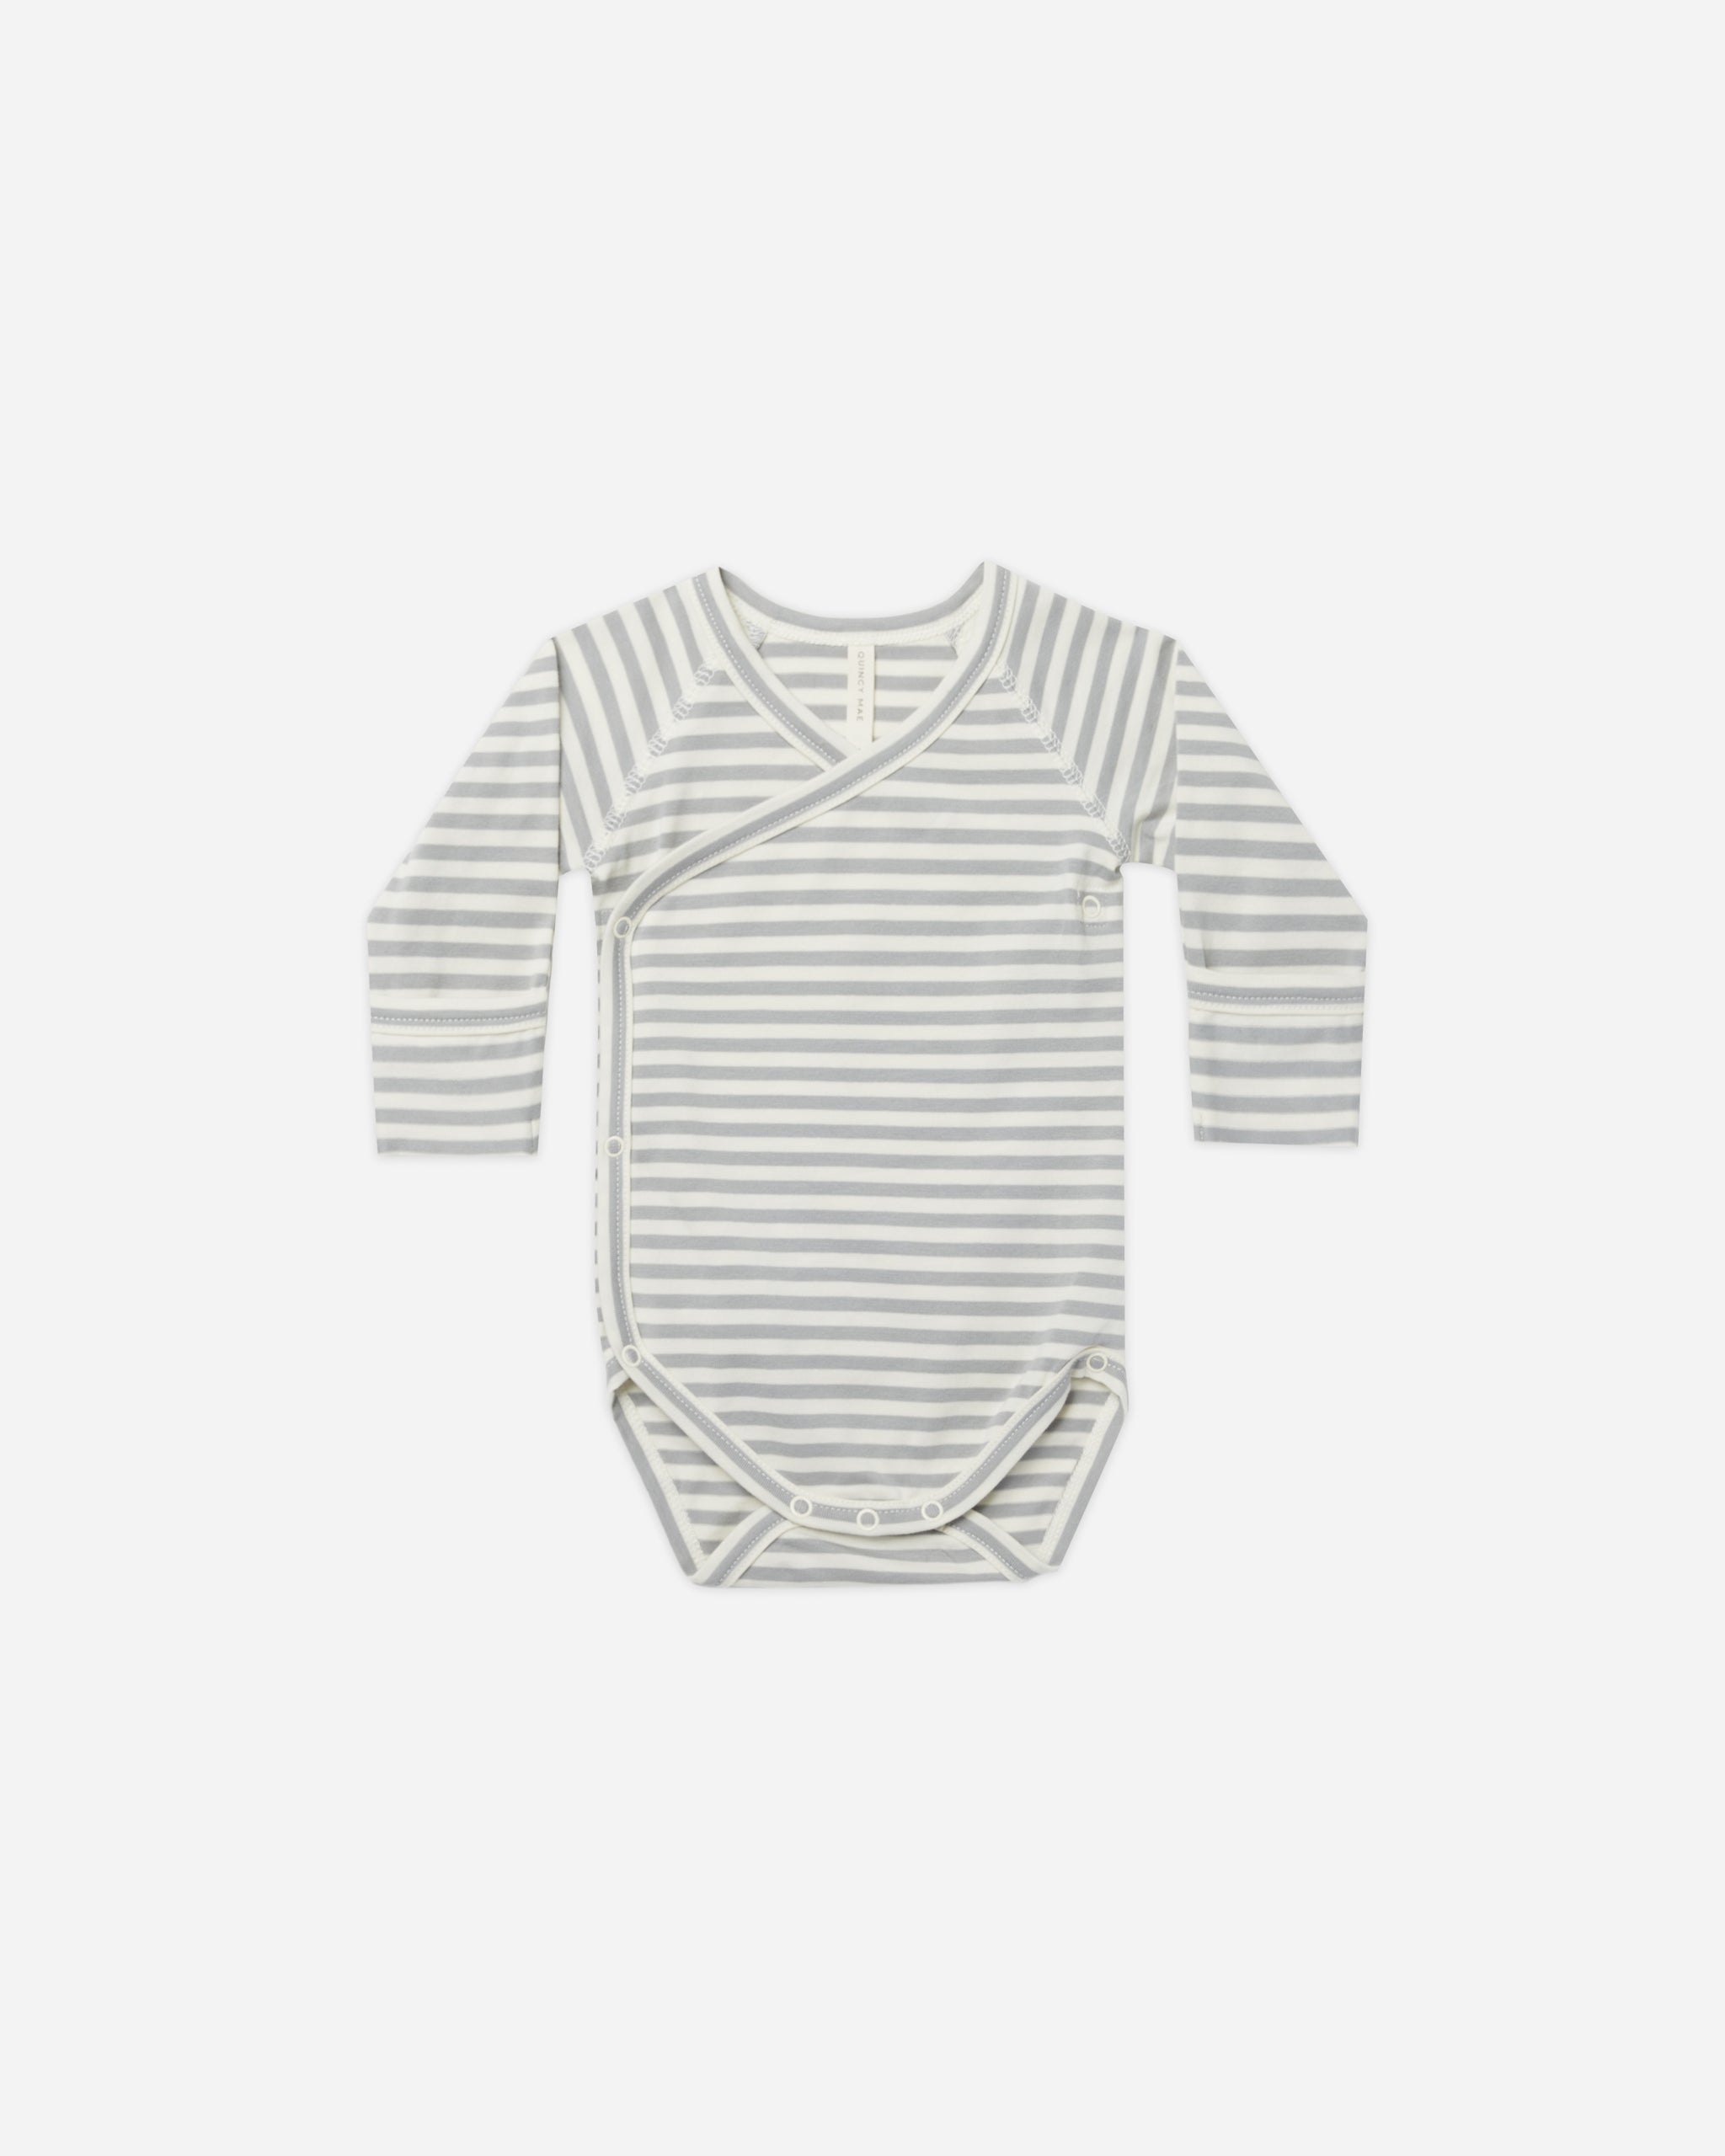 Side-Snap Bodysuit || Dusty Blue Stripe - Rylee + Cru | Kids Clothes | Trendy Baby Clothes | Modern Infant Outfits |